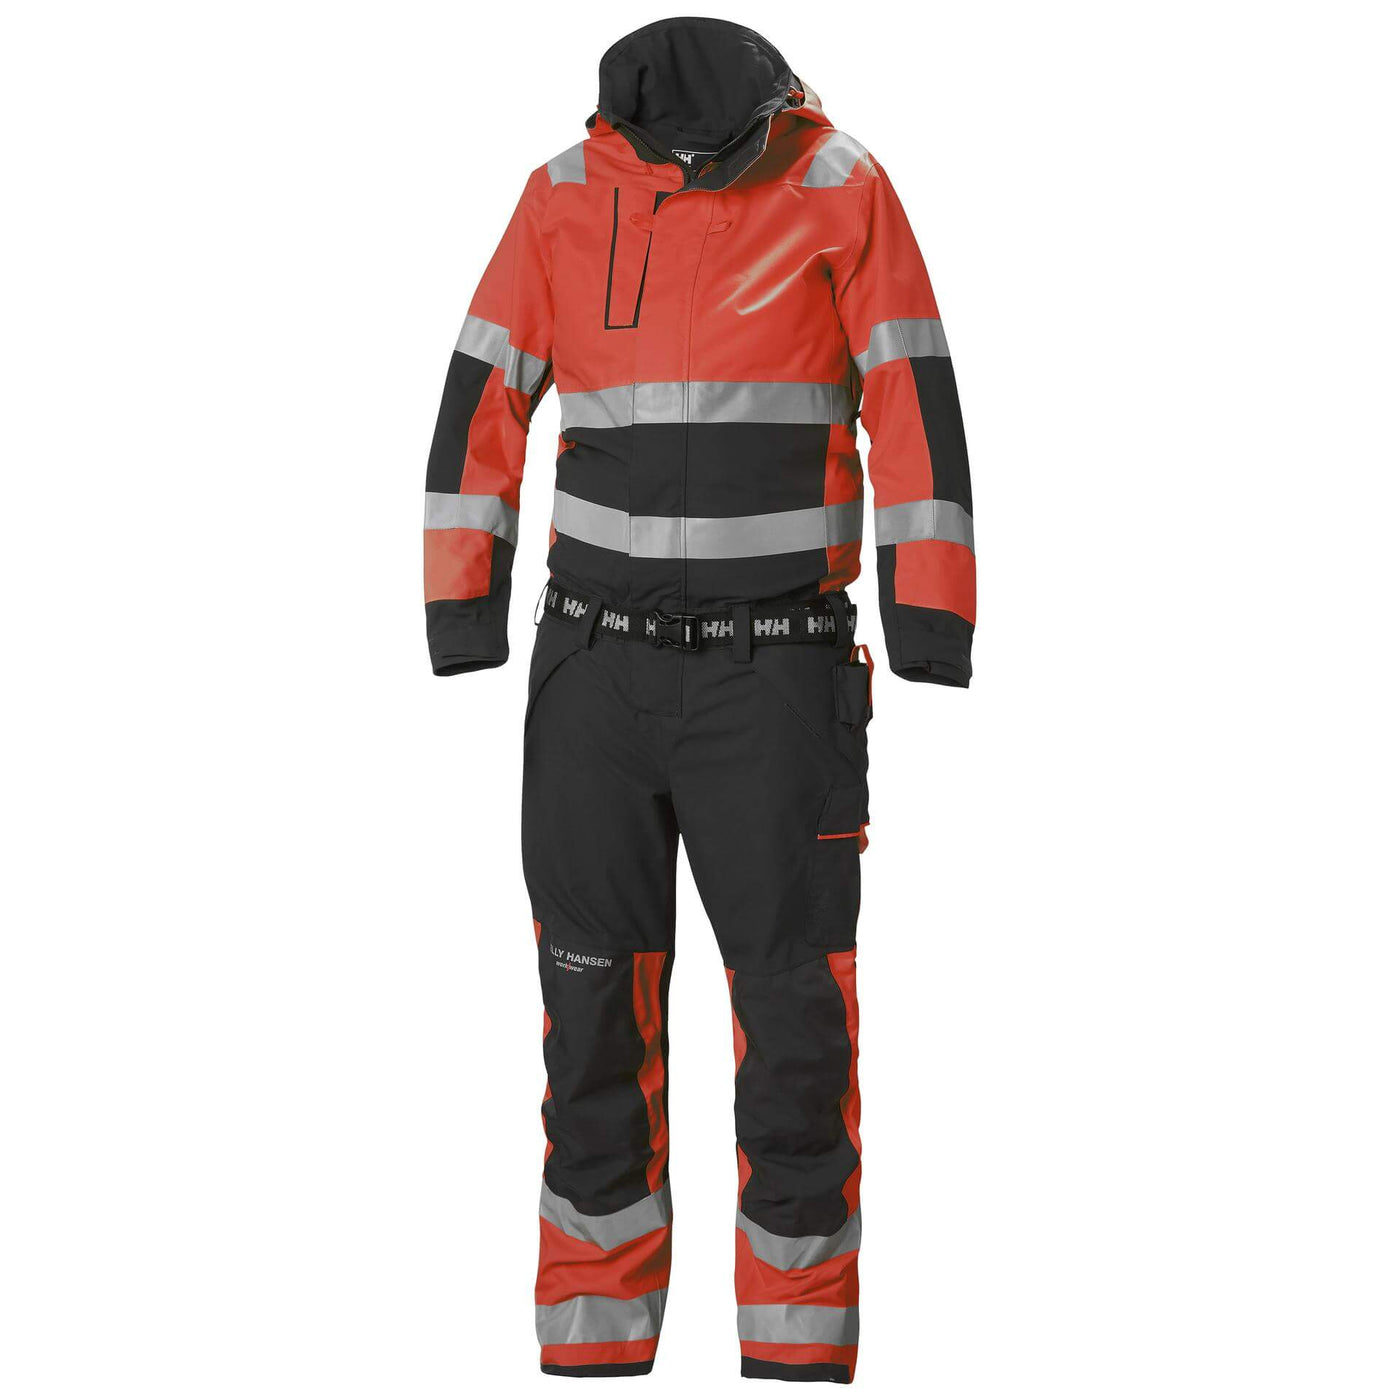 Helly Hansen Alna 2.0 Hi Vis Waterproof Shell Overalls Suit Red/Ebony 1 Front #colour_red-ebony